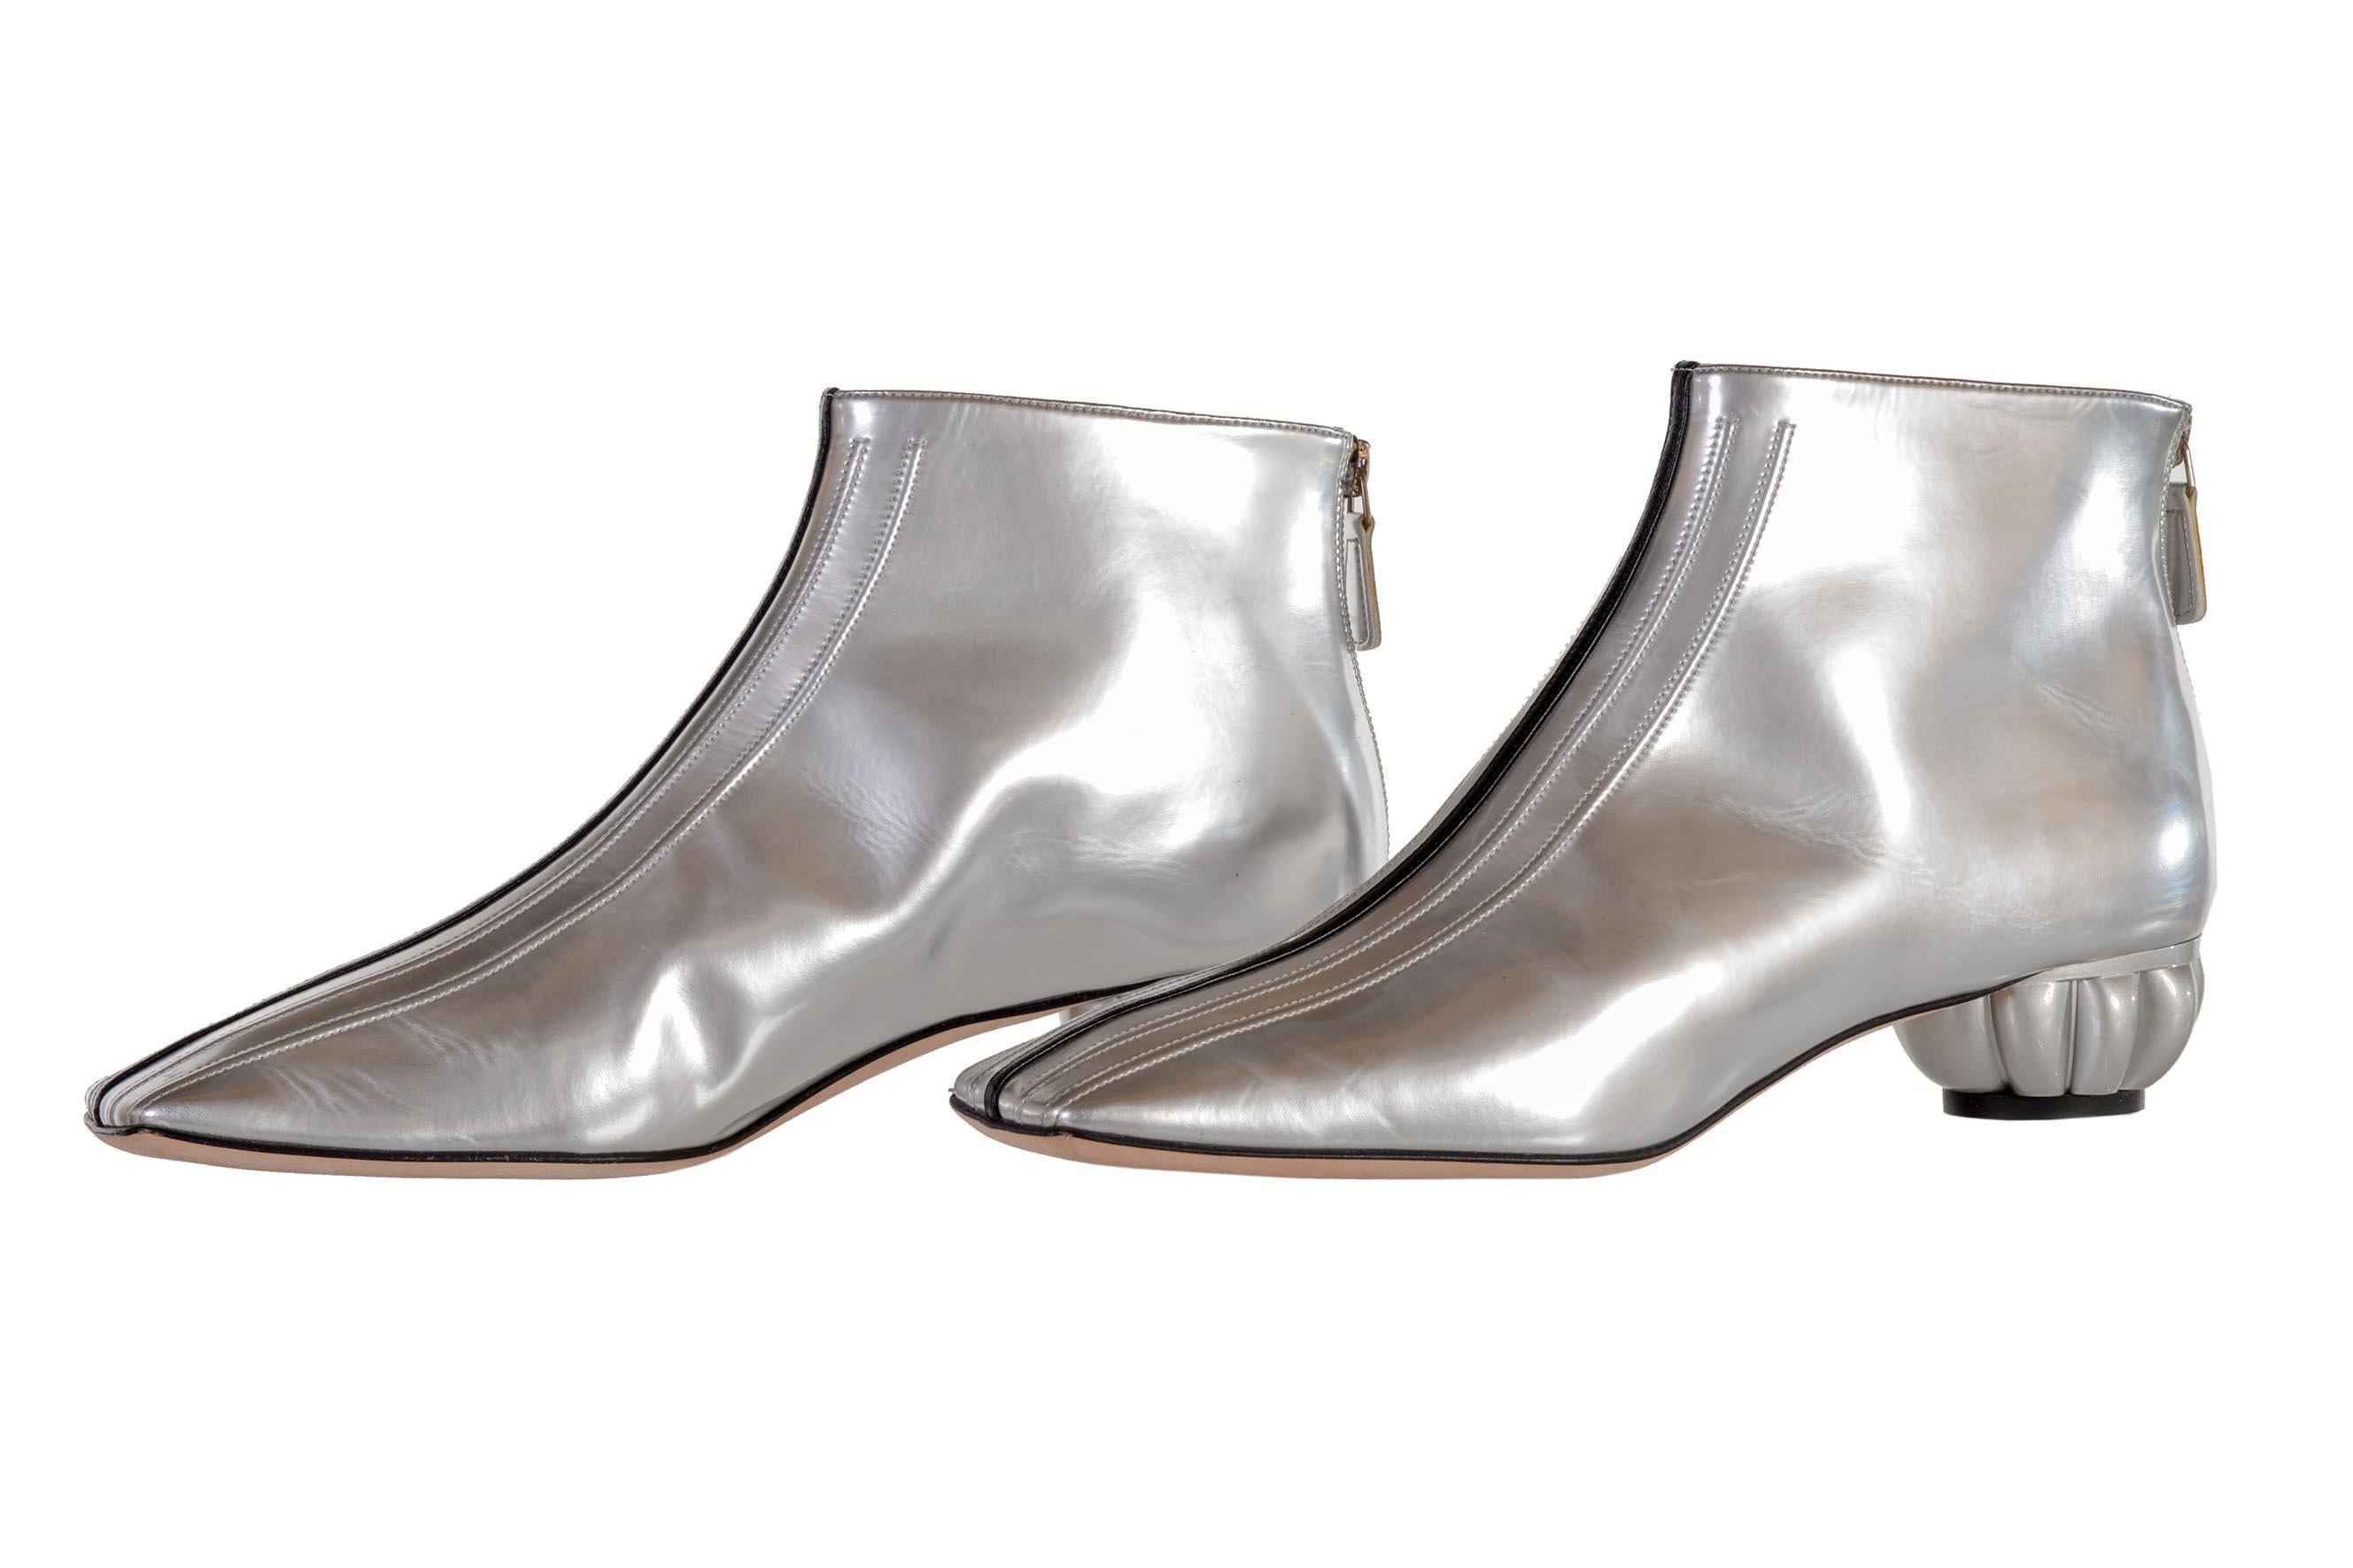 Chanel silver leather ankle boots
Back zip
Size IT 41 - US 11 - UK 8
Made in Italy
New - never worn
No box